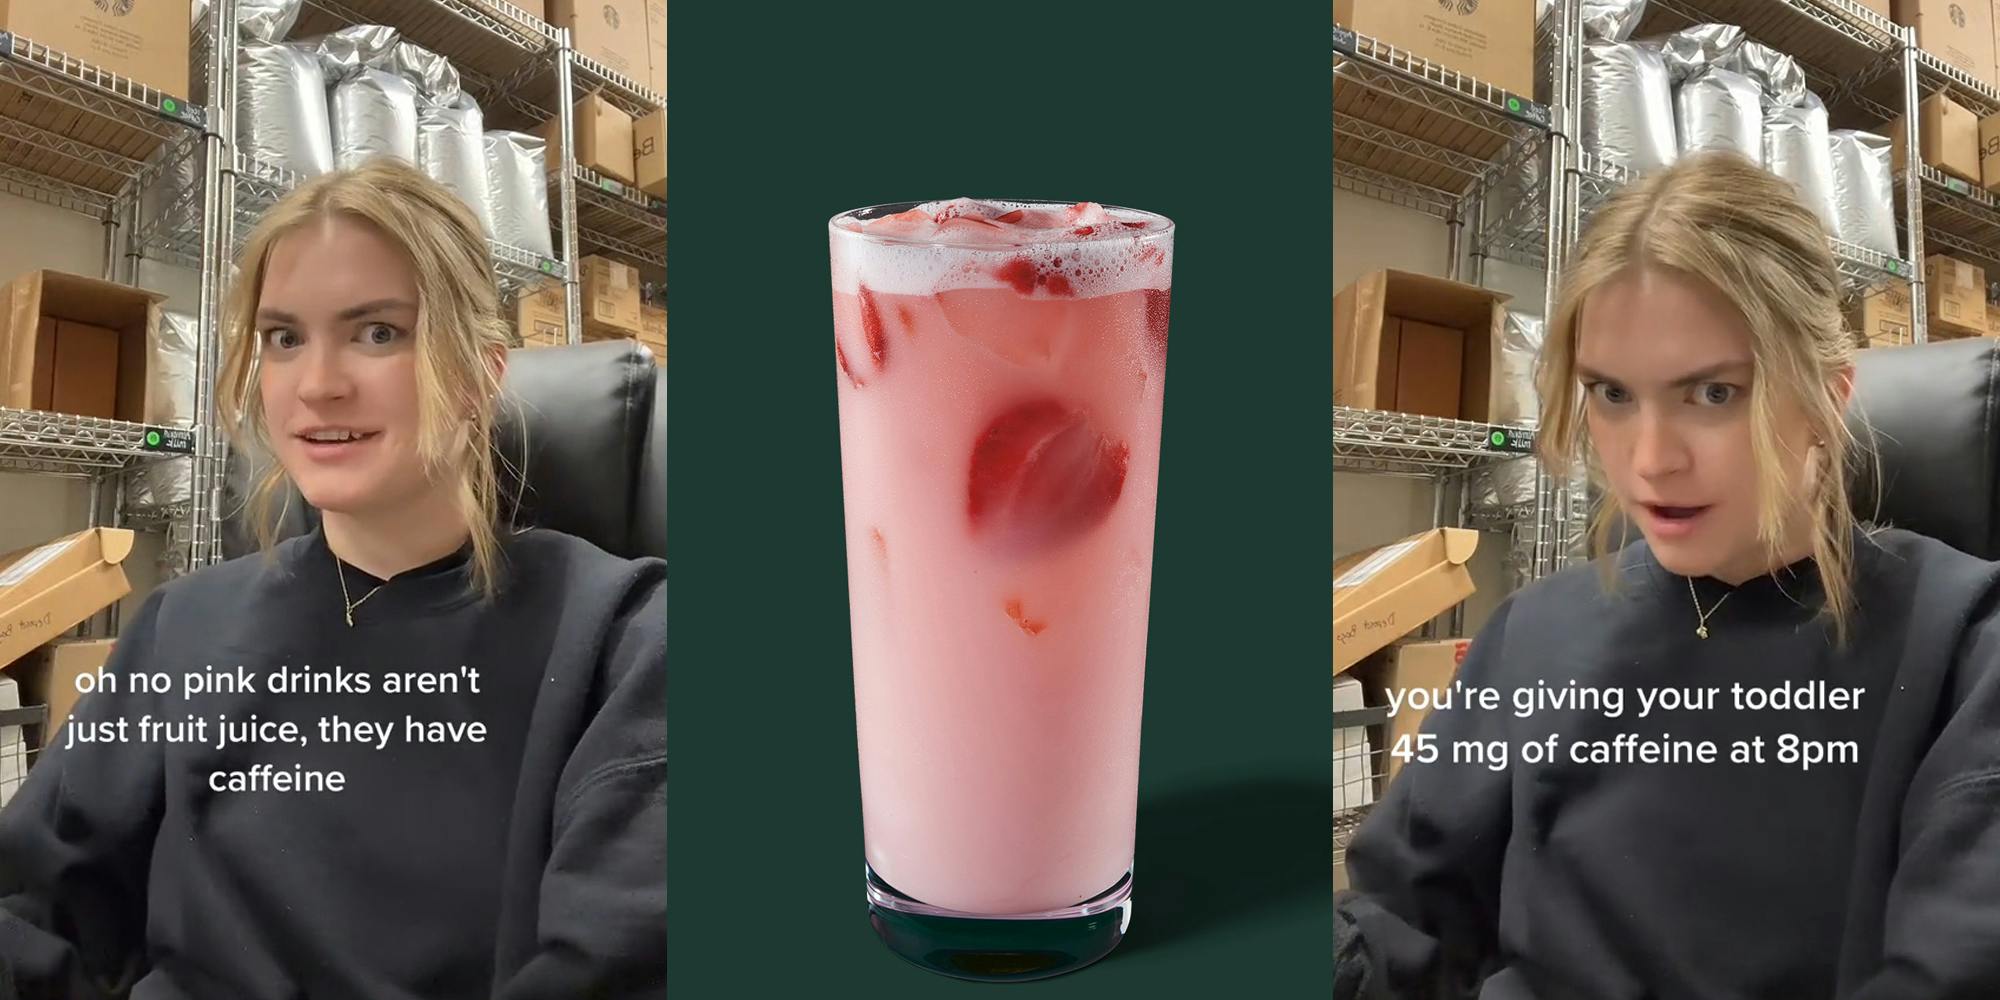 person sitting in chair with caption "oh no pink drinks aren't fruit juice, they have caffeine" (l) Starbucks Pink Drink in front of green background (c) person sitting in chair with caption "you're giving your toddler 45 mg of caffeine at 8pm" (r)